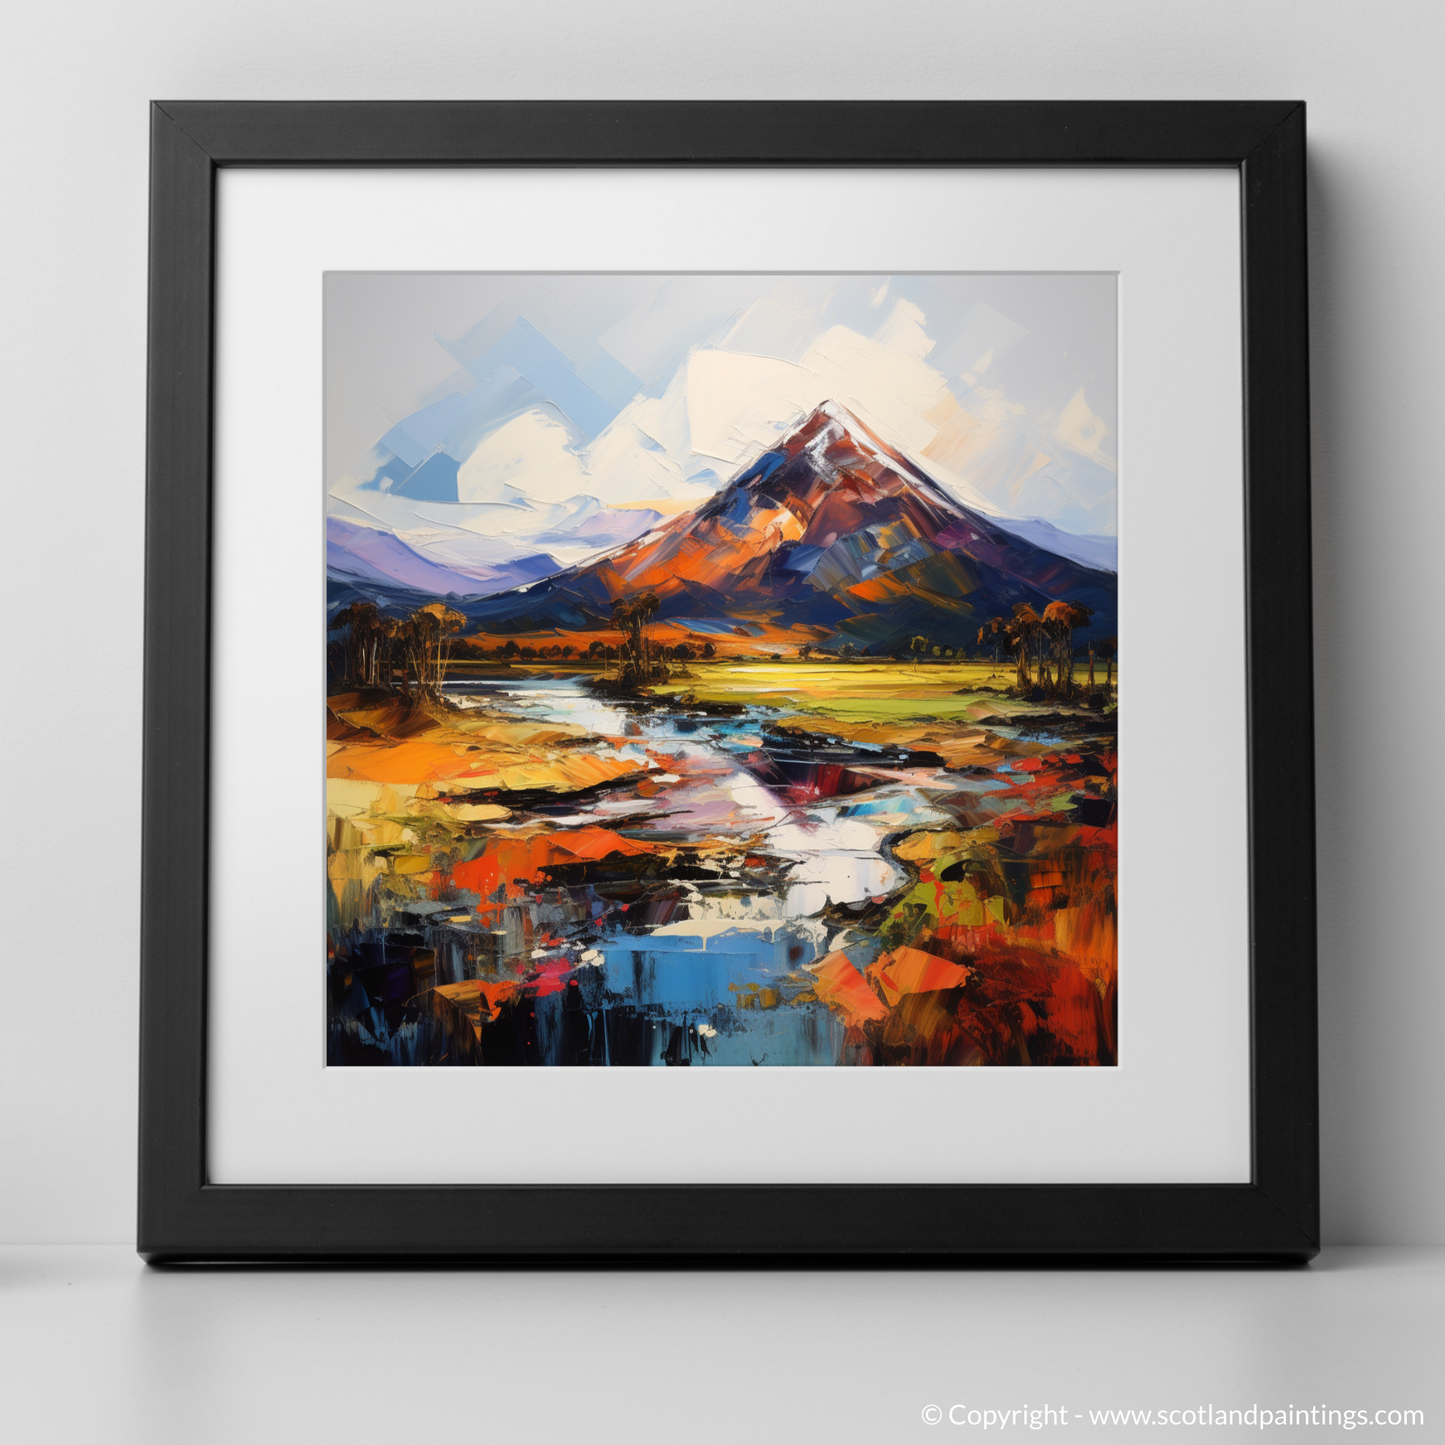 Art Print of Schiehallion, Perth and Kinross with a black frame